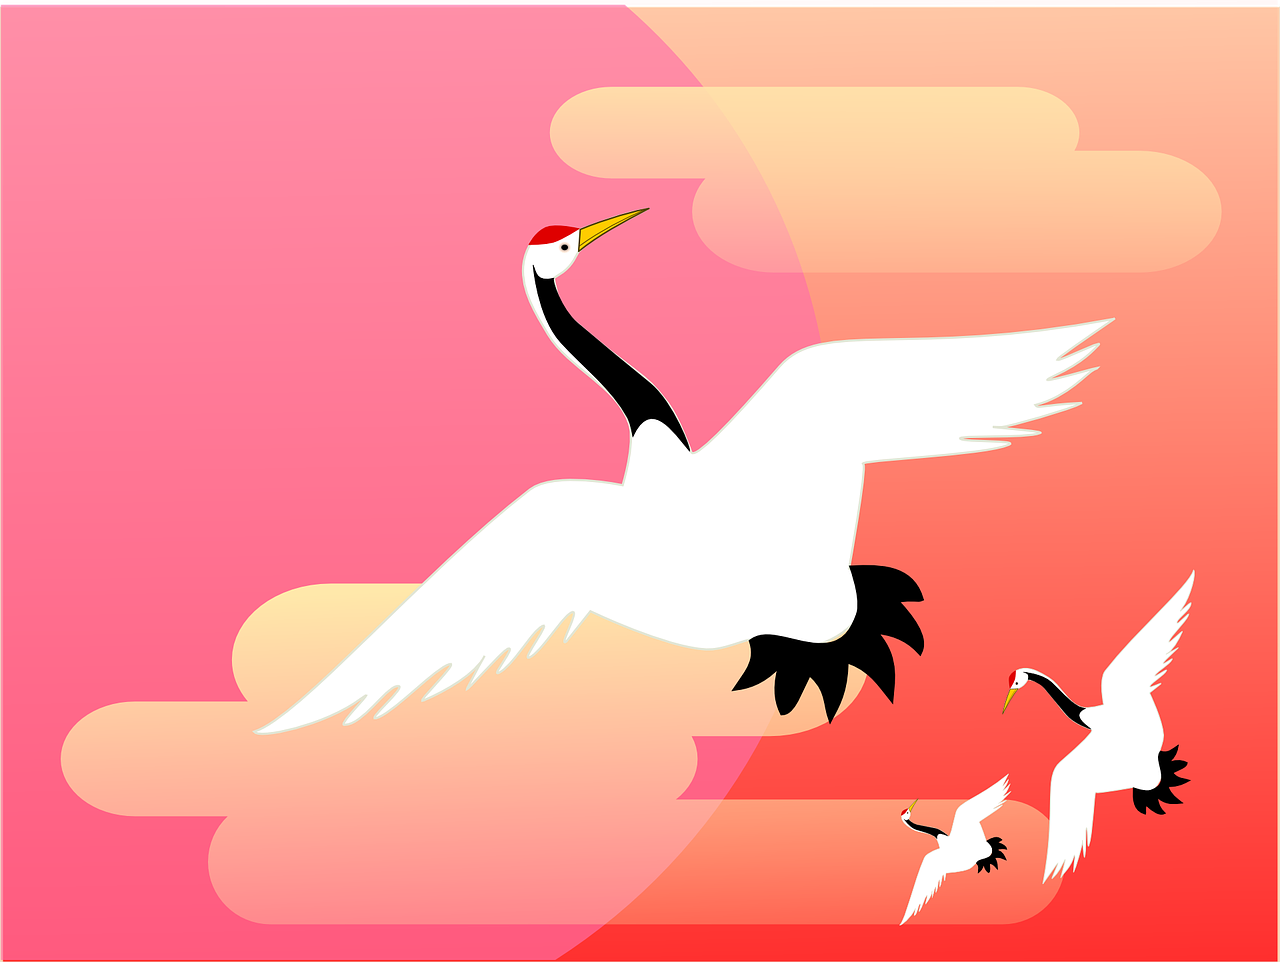 a couple of birds flying next to each other, an illustration of, inspired by Sugimura Jihei, shutterstock, cranes, family photo, background image, art deco illustration